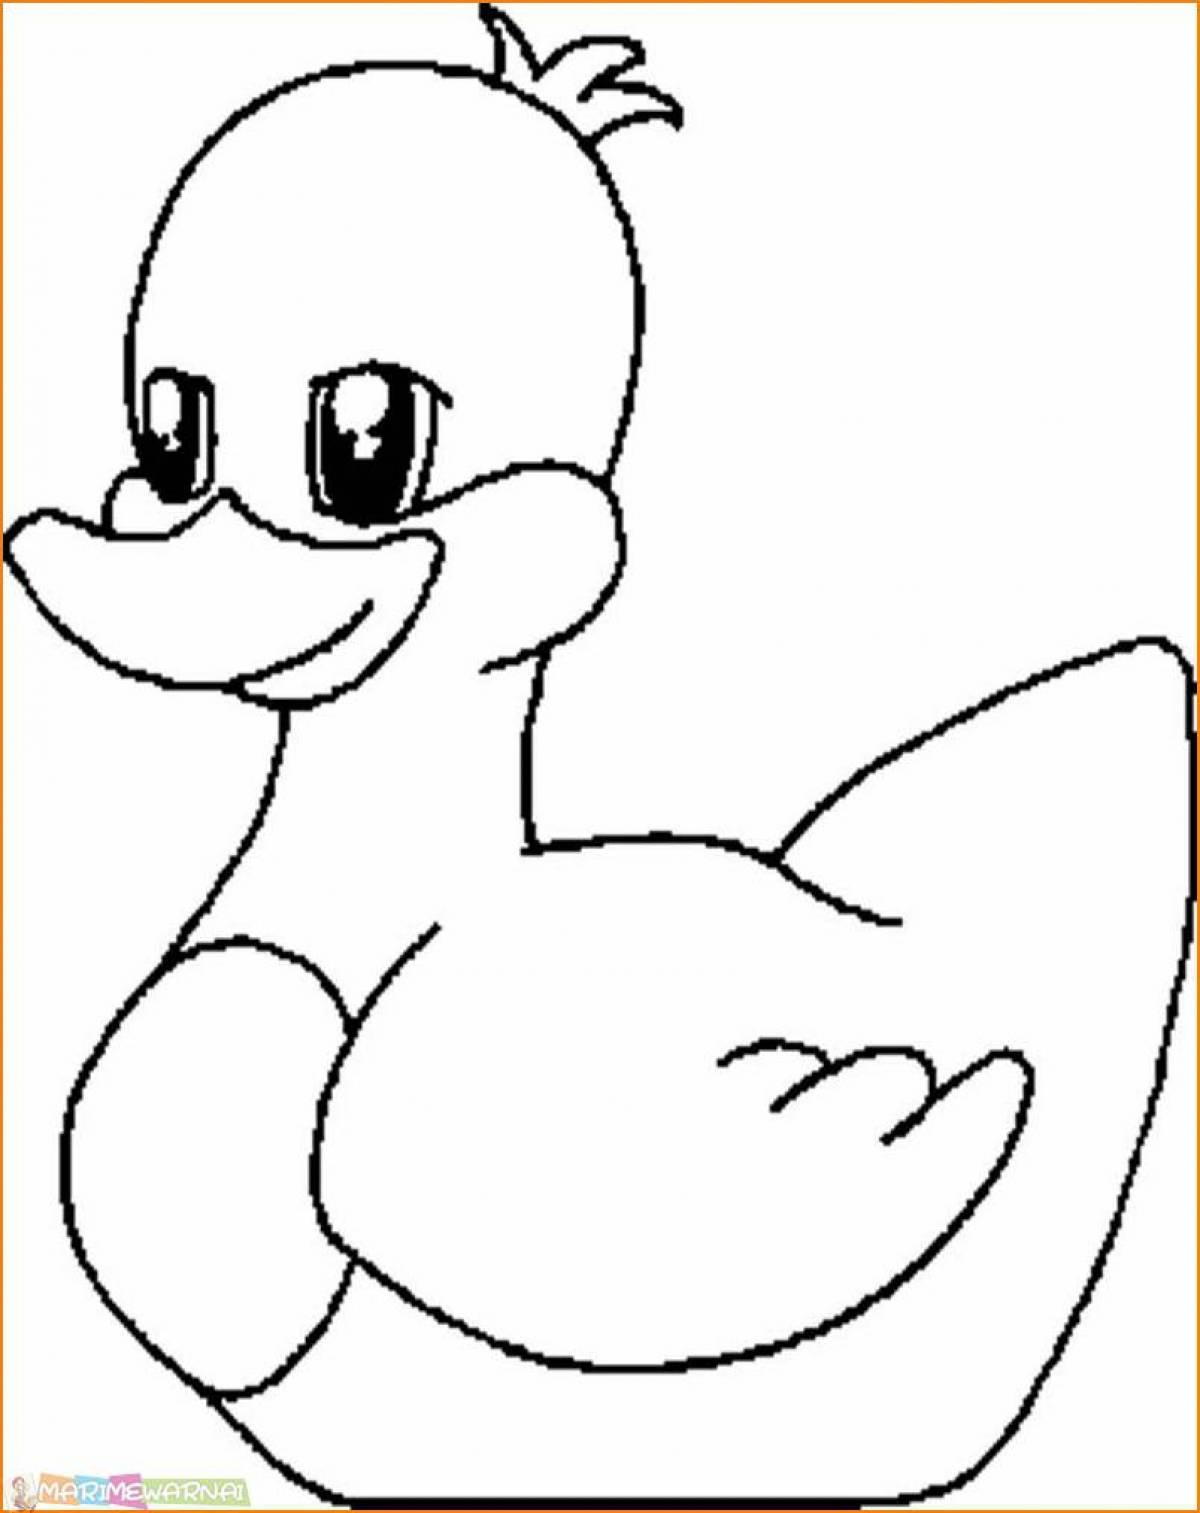 Funny duck coloring for kids